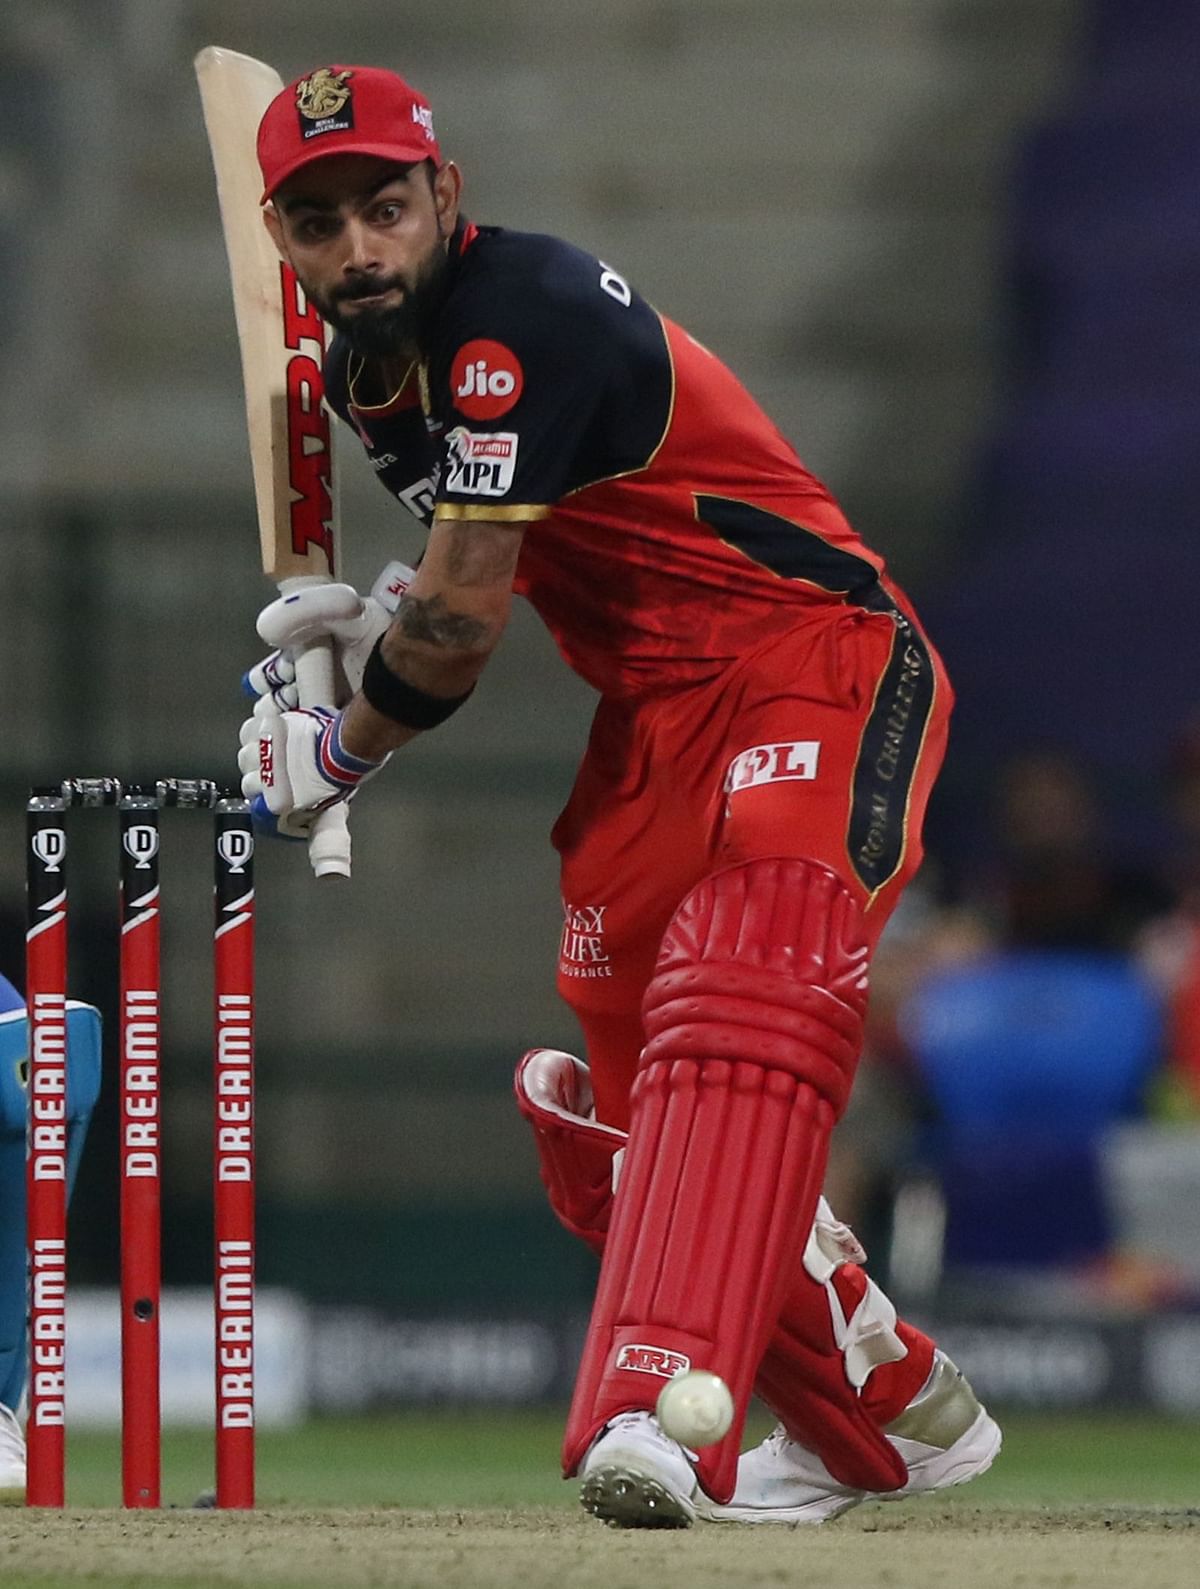 Vaughan said that RCB don’t have enough players full of confidence after coming off four losses in a row.